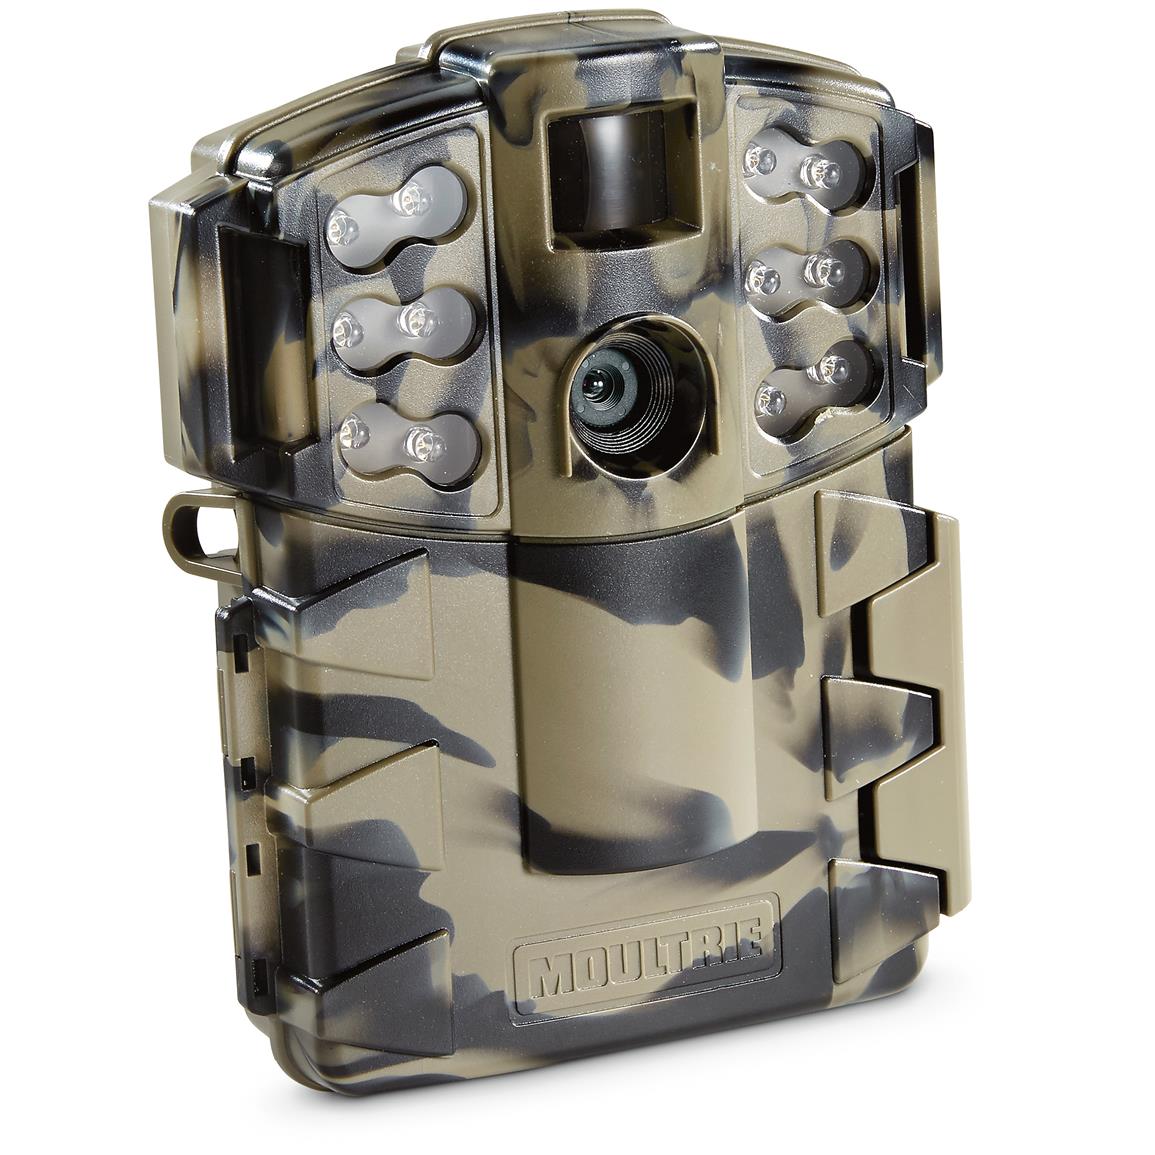 moultrie-sg-8-infrared-trail-game-camera-8mp-638191-game-trail